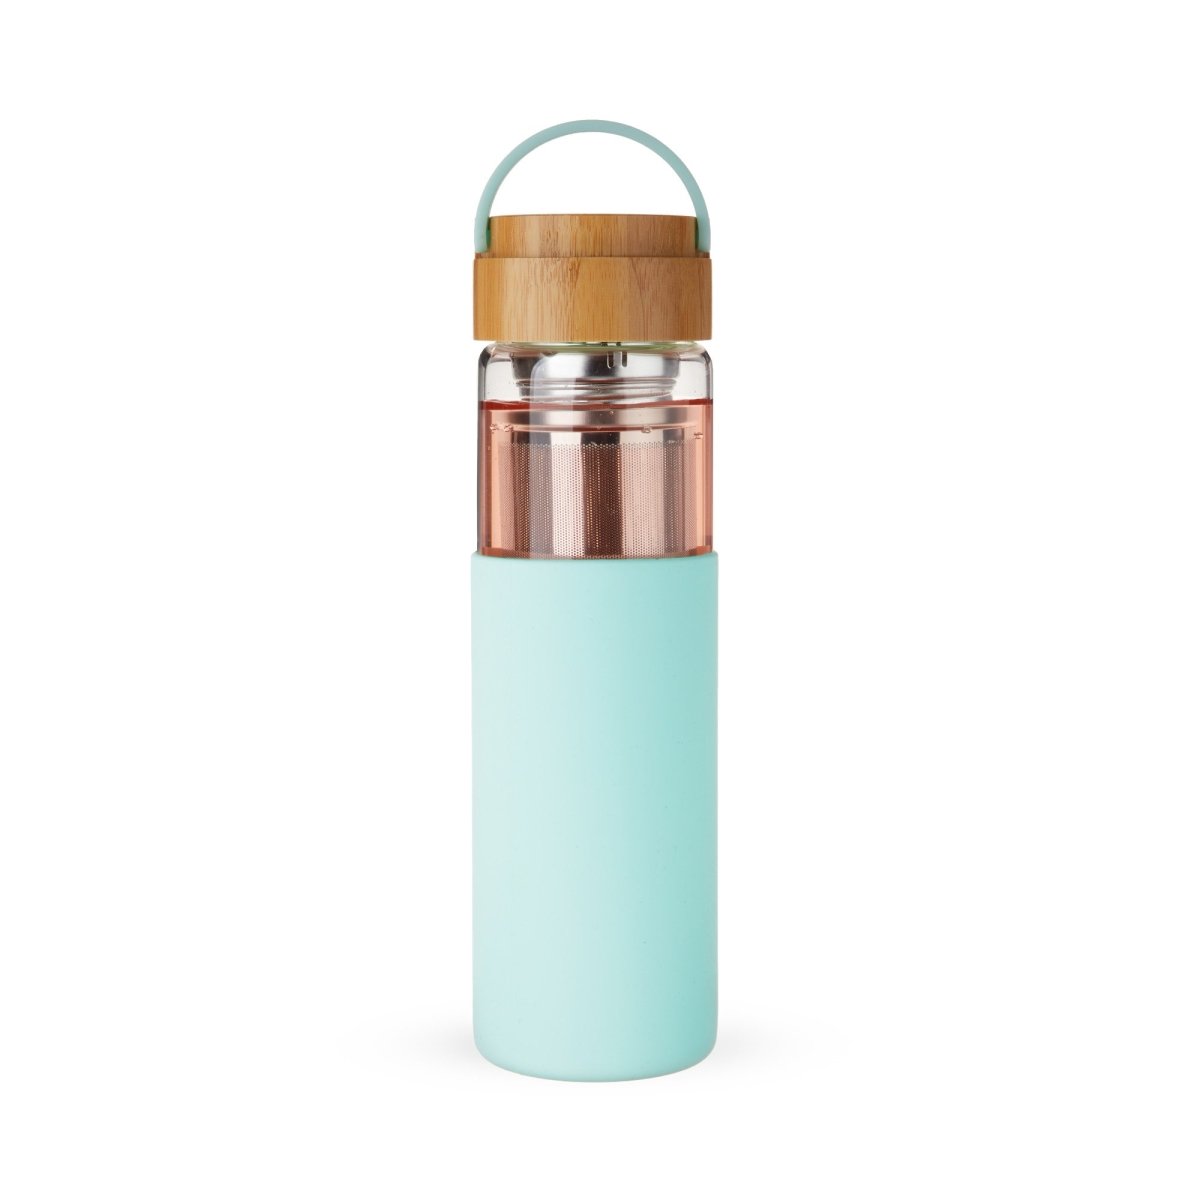 Pinky Up Paige™ Glass Travel Mug in Turquoise - lily & onyx